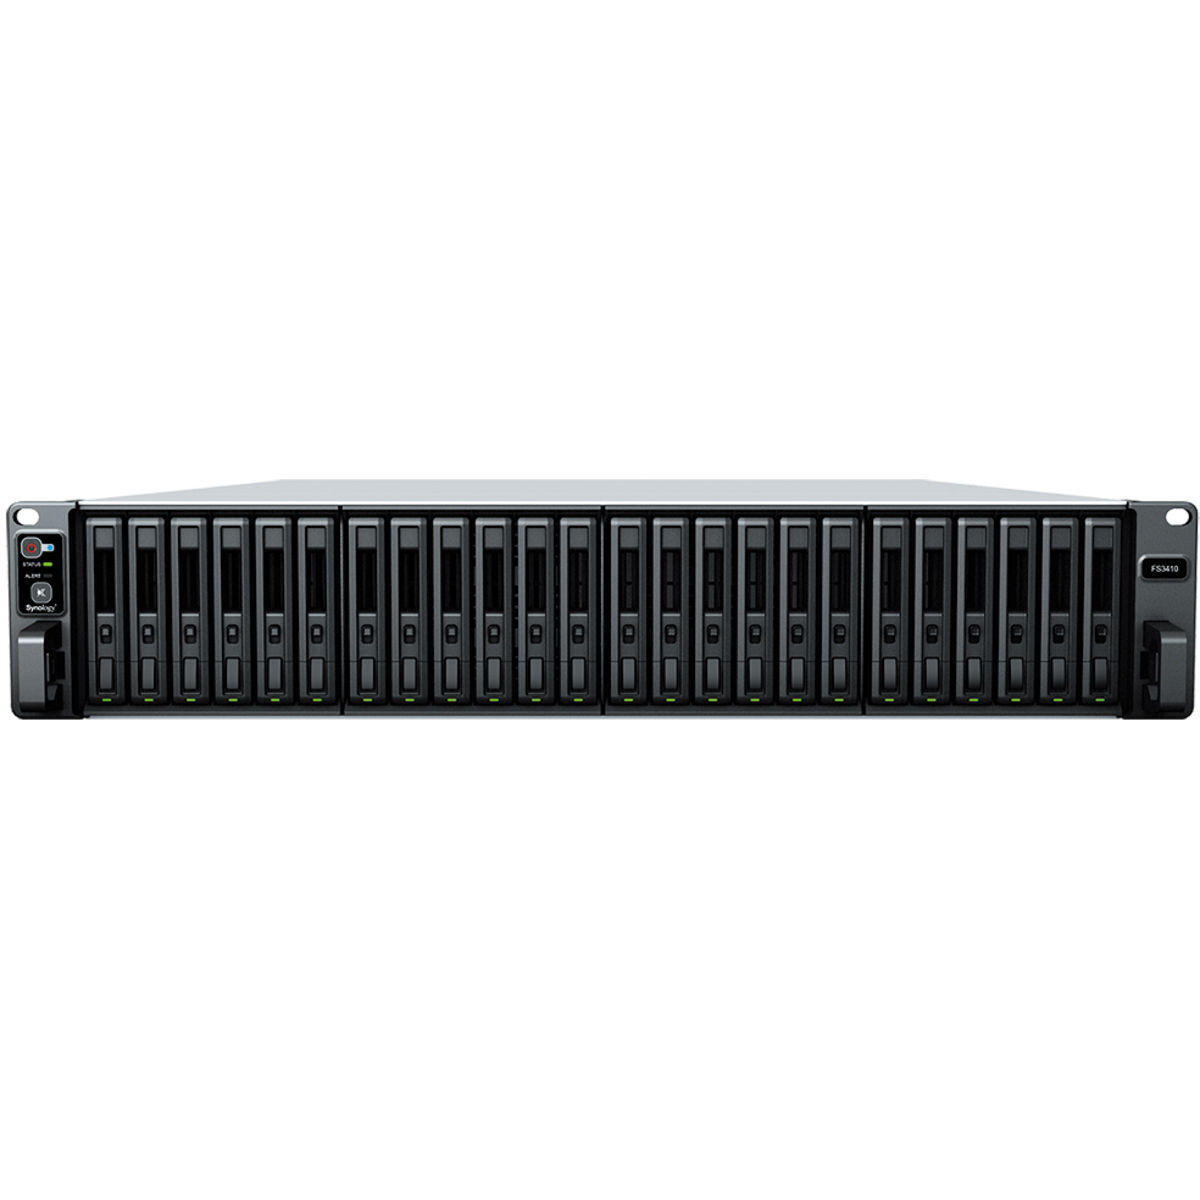 Synology FlashStation FS3410 20tb 24-Bay RackMount Large Business / Enterprise NAS - Network Attached Storage Device 20x1tb Crucial MX500 CT1000MX500SSD1 2.5 560/510MB/s SATA 6Gb/s SSD CONSUMER Class Drives Installed - Burn-In Tested FlashStation FS3410